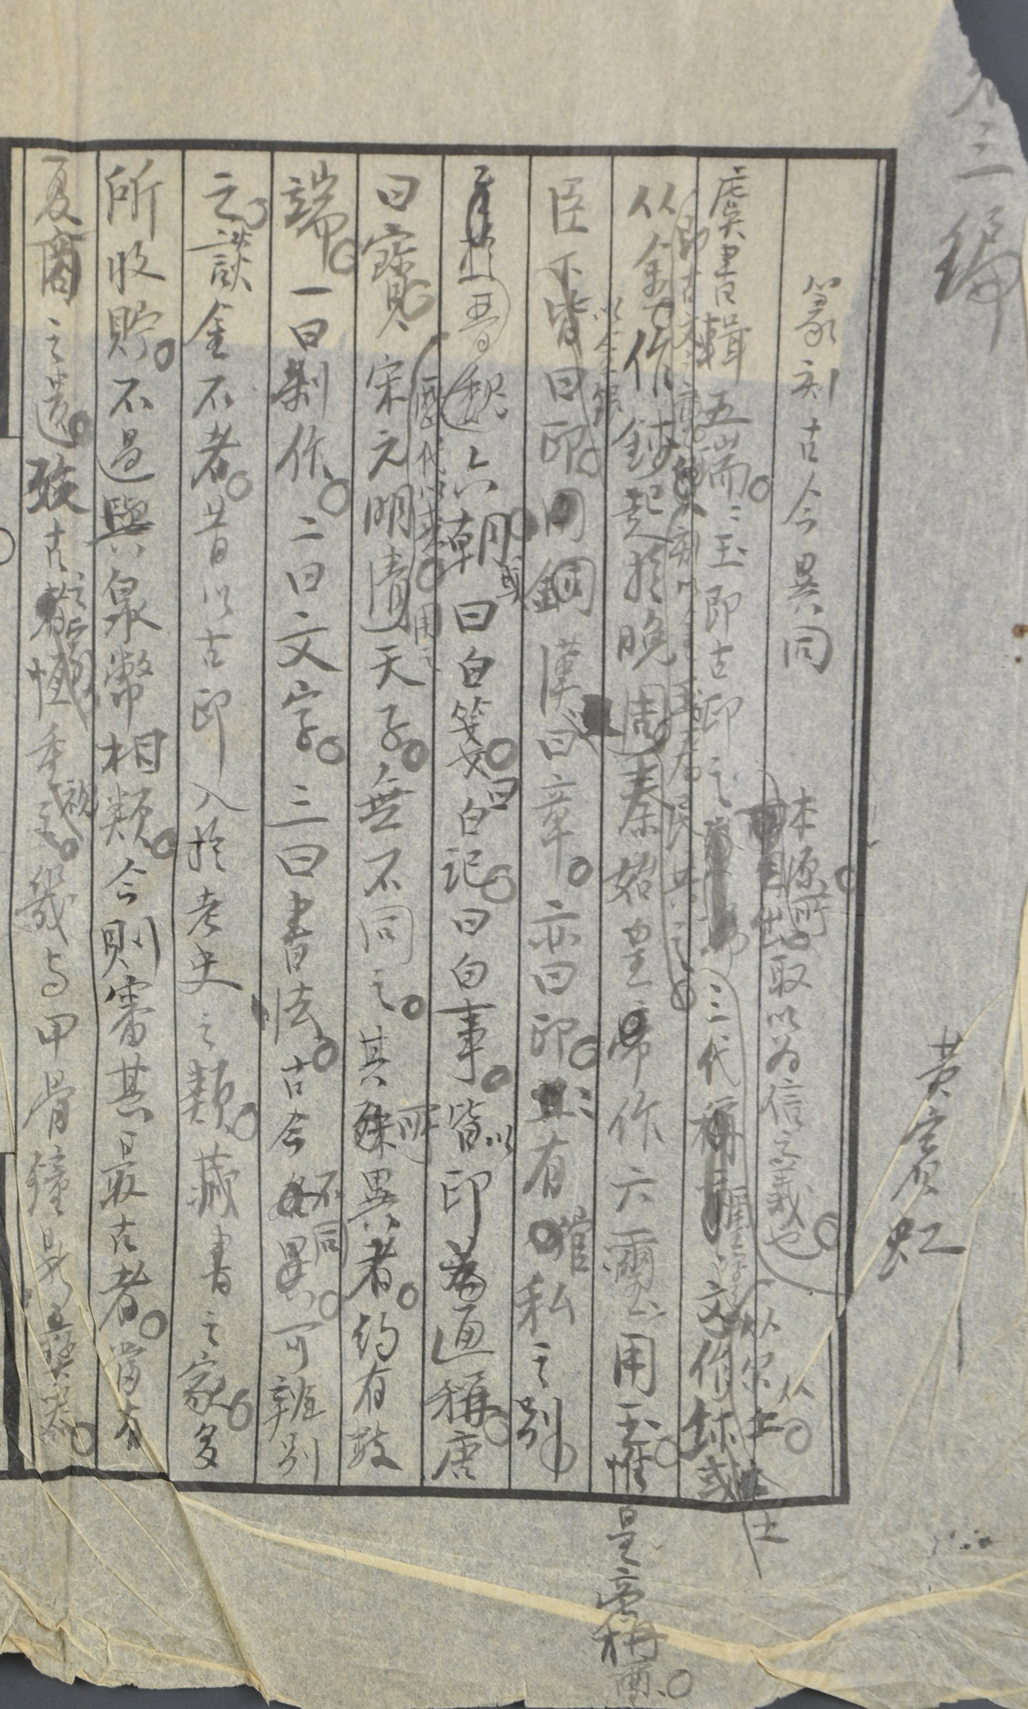 Manuscript of Huang Binhong's "Jinshi Calligraphy and Painting Series III: Similarities and Differences in Seal Carving Between Ancient and Modern", circa 1926 (detail)